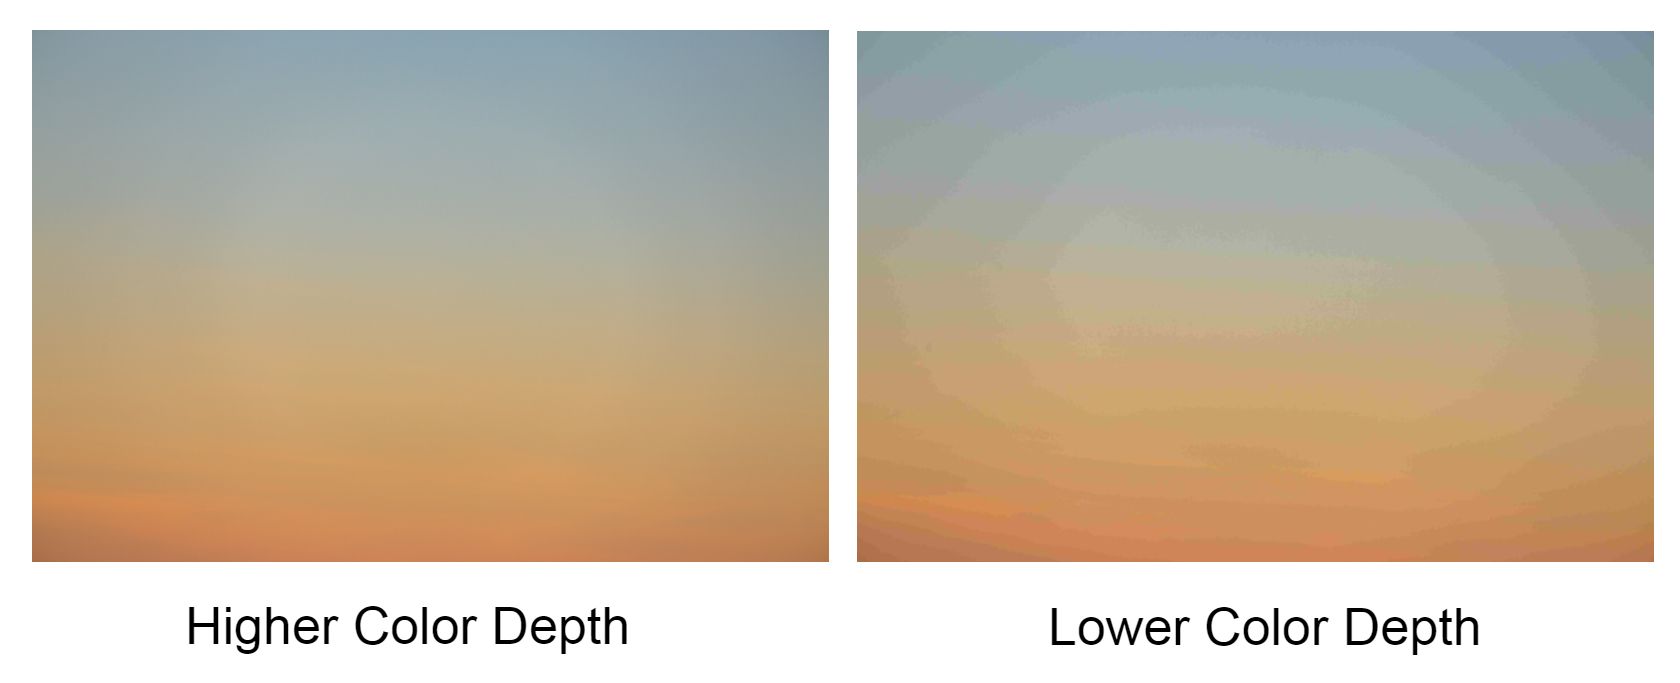 Comparing High and Low Color Depth